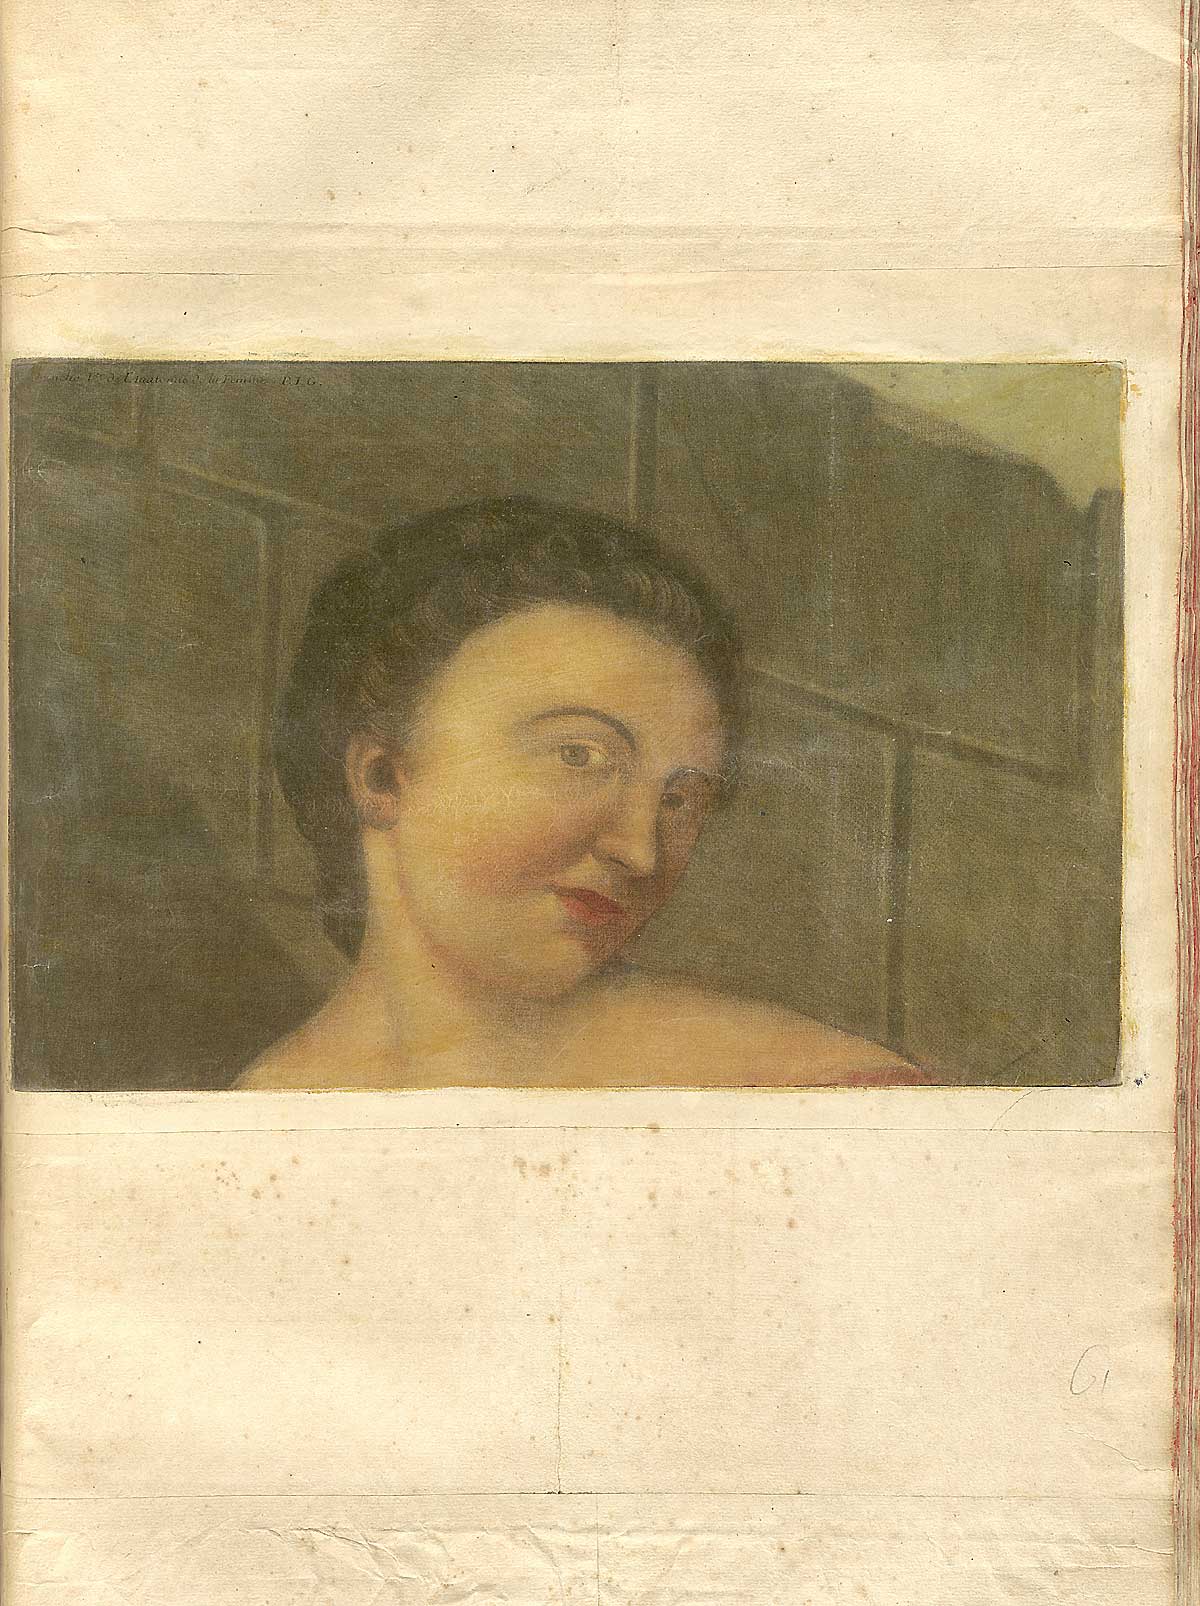 Color mezzotint of a woman’s head, looking towards the viewer but turned about 45 degrees to the right; from Jacques Fabian Gautier d’Agoty’s Anatomie générale des viscères en situation, NLM Call no.: WZ 260 G283c 1745.